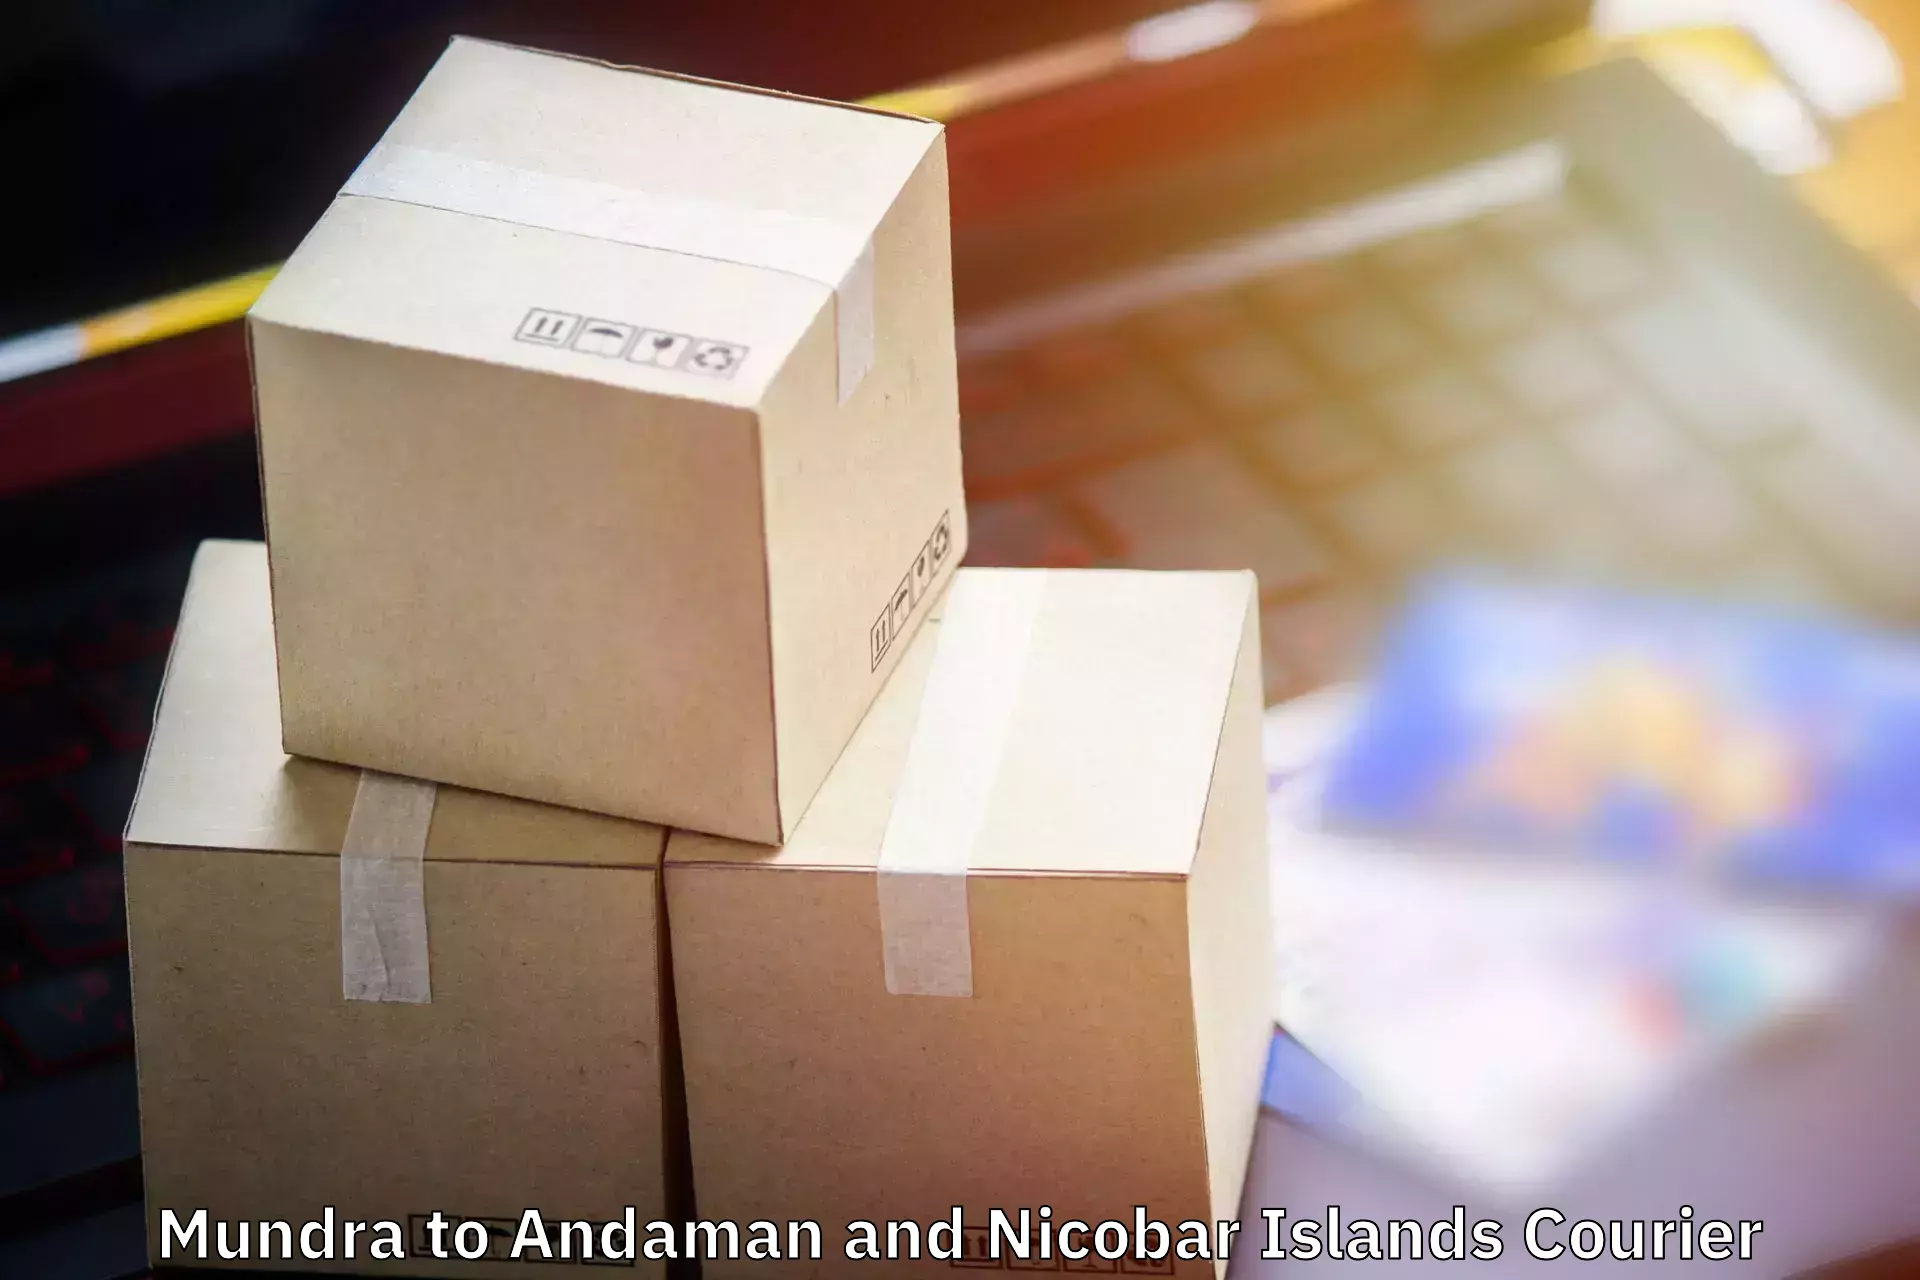 Luggage delivery network Mundra to Andaman and Nicobar Islands